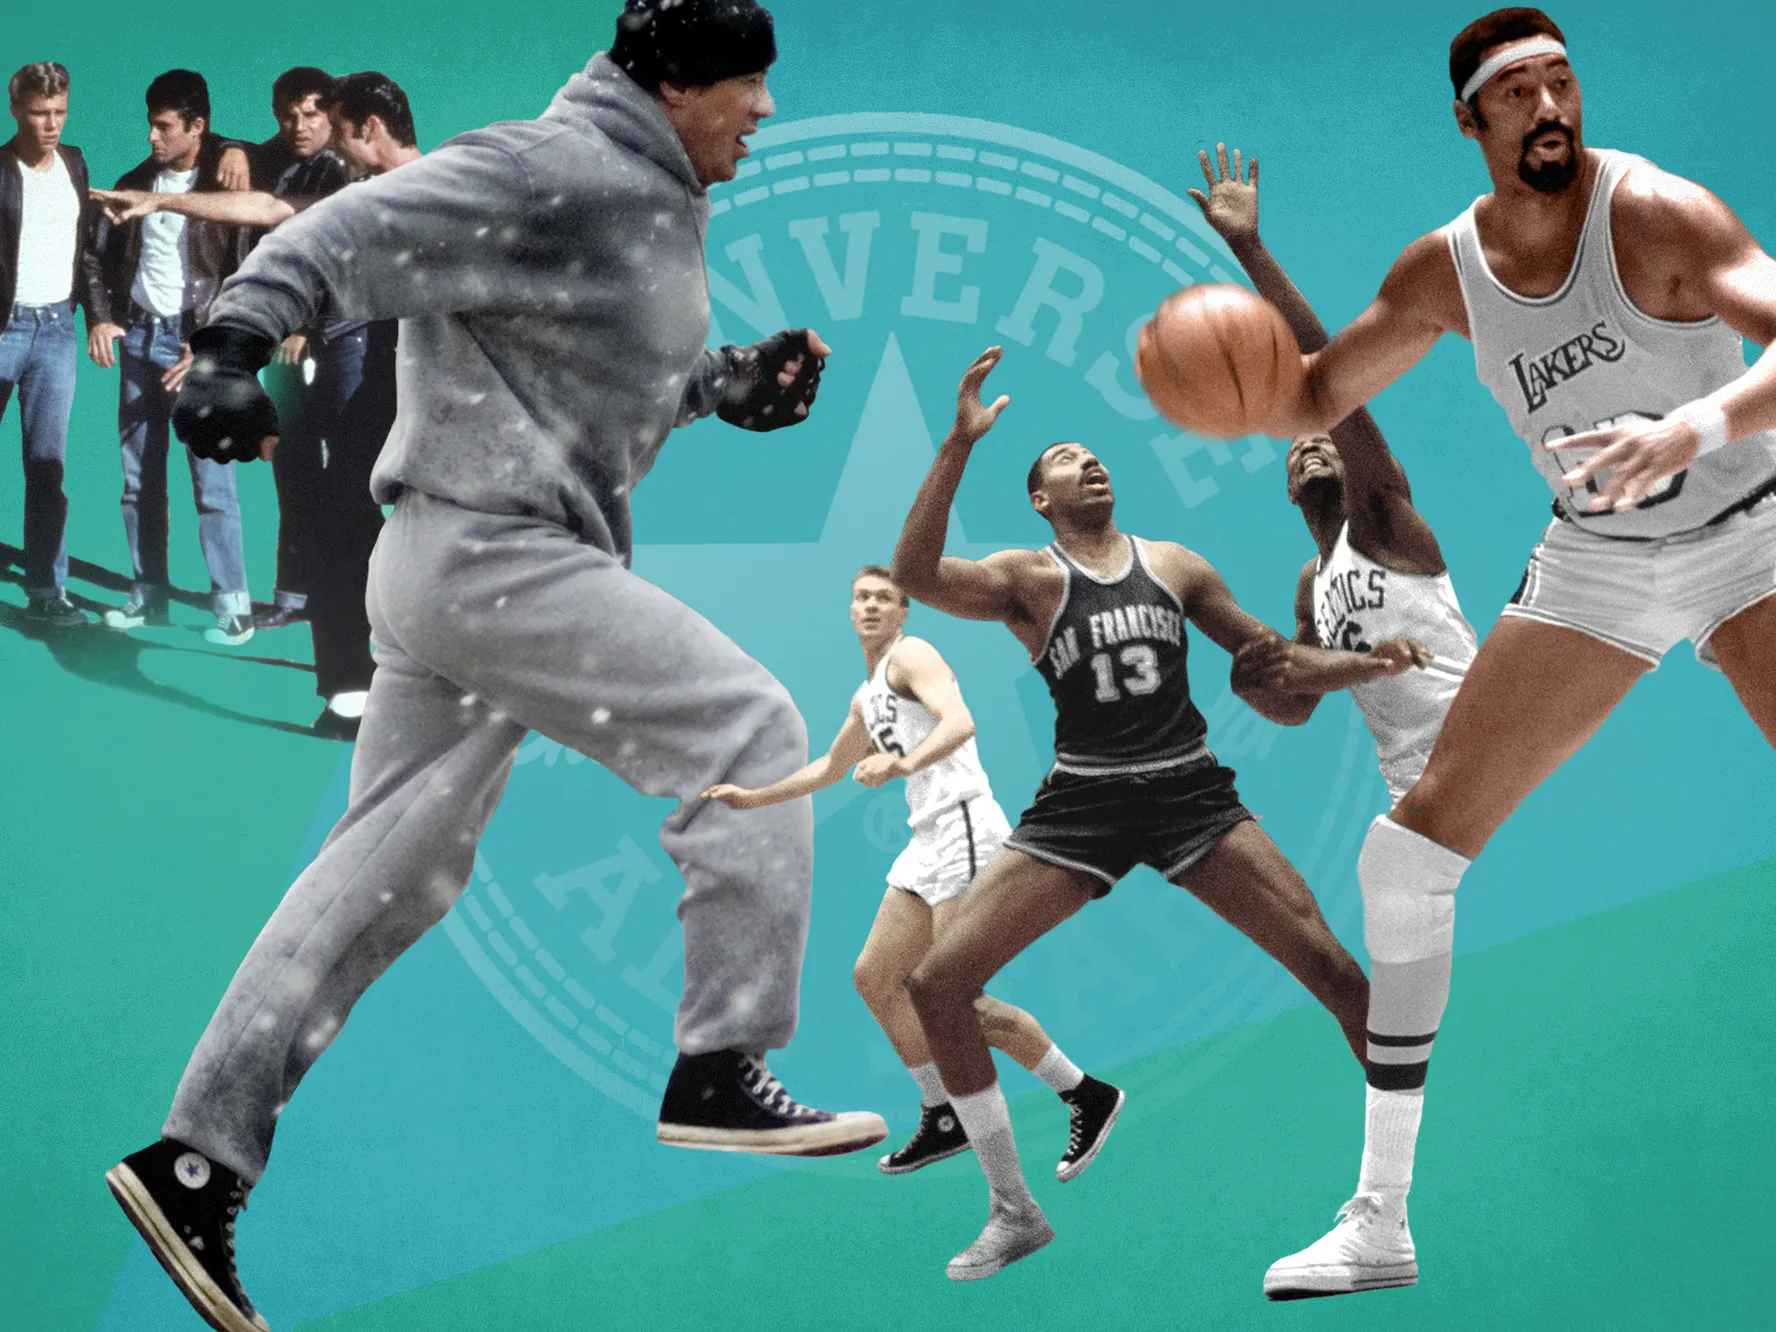 The athletic gistory of the Converse 